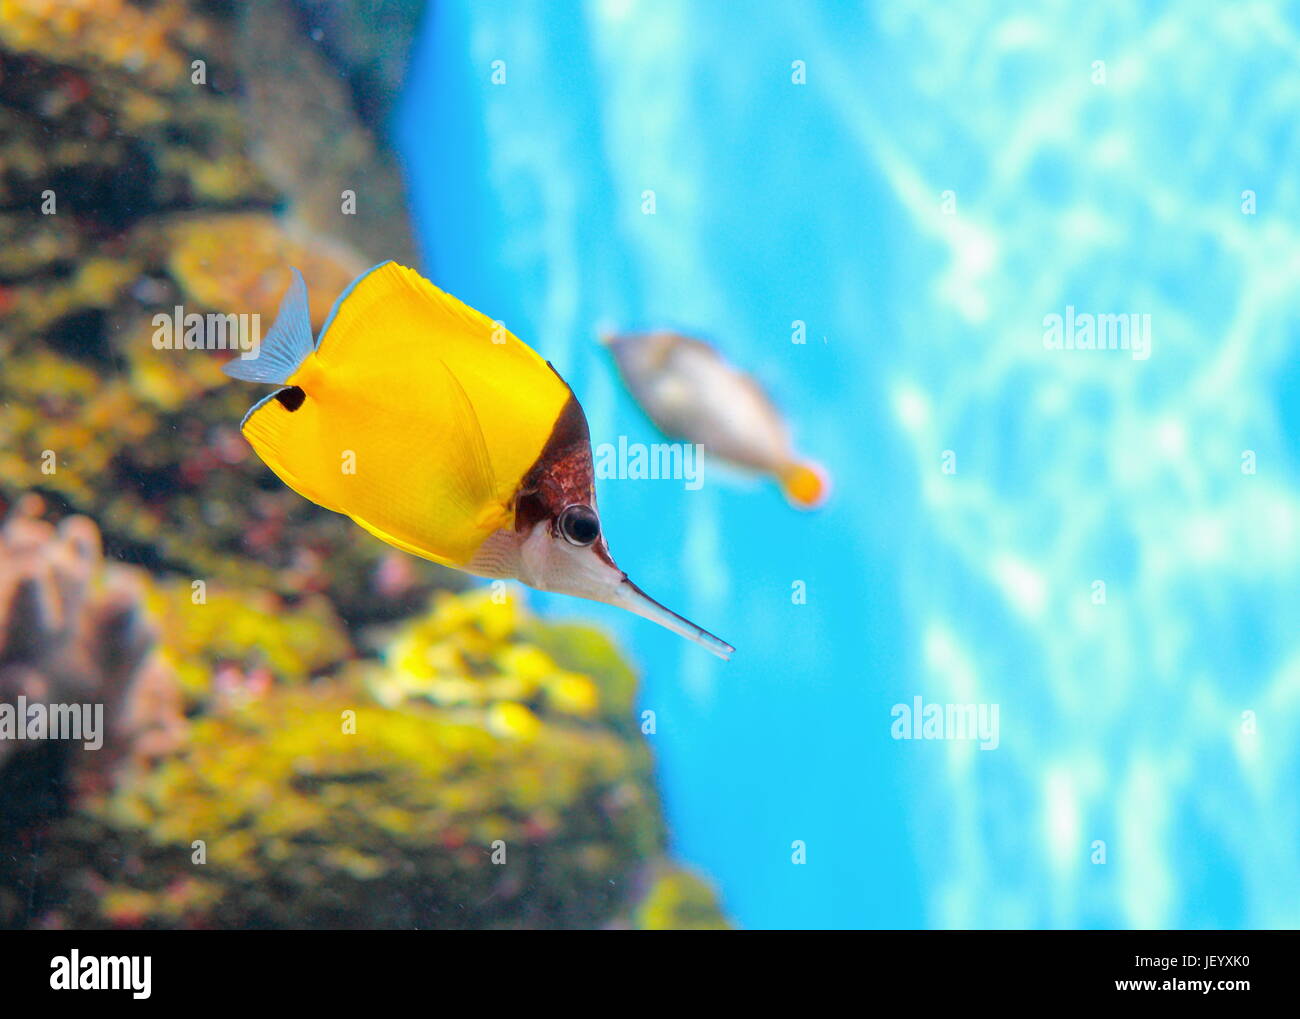 Il giallo butterflyfish longnose ((Forcipiger flavissimus) o il forcipe butterflyfish. Foto Stock